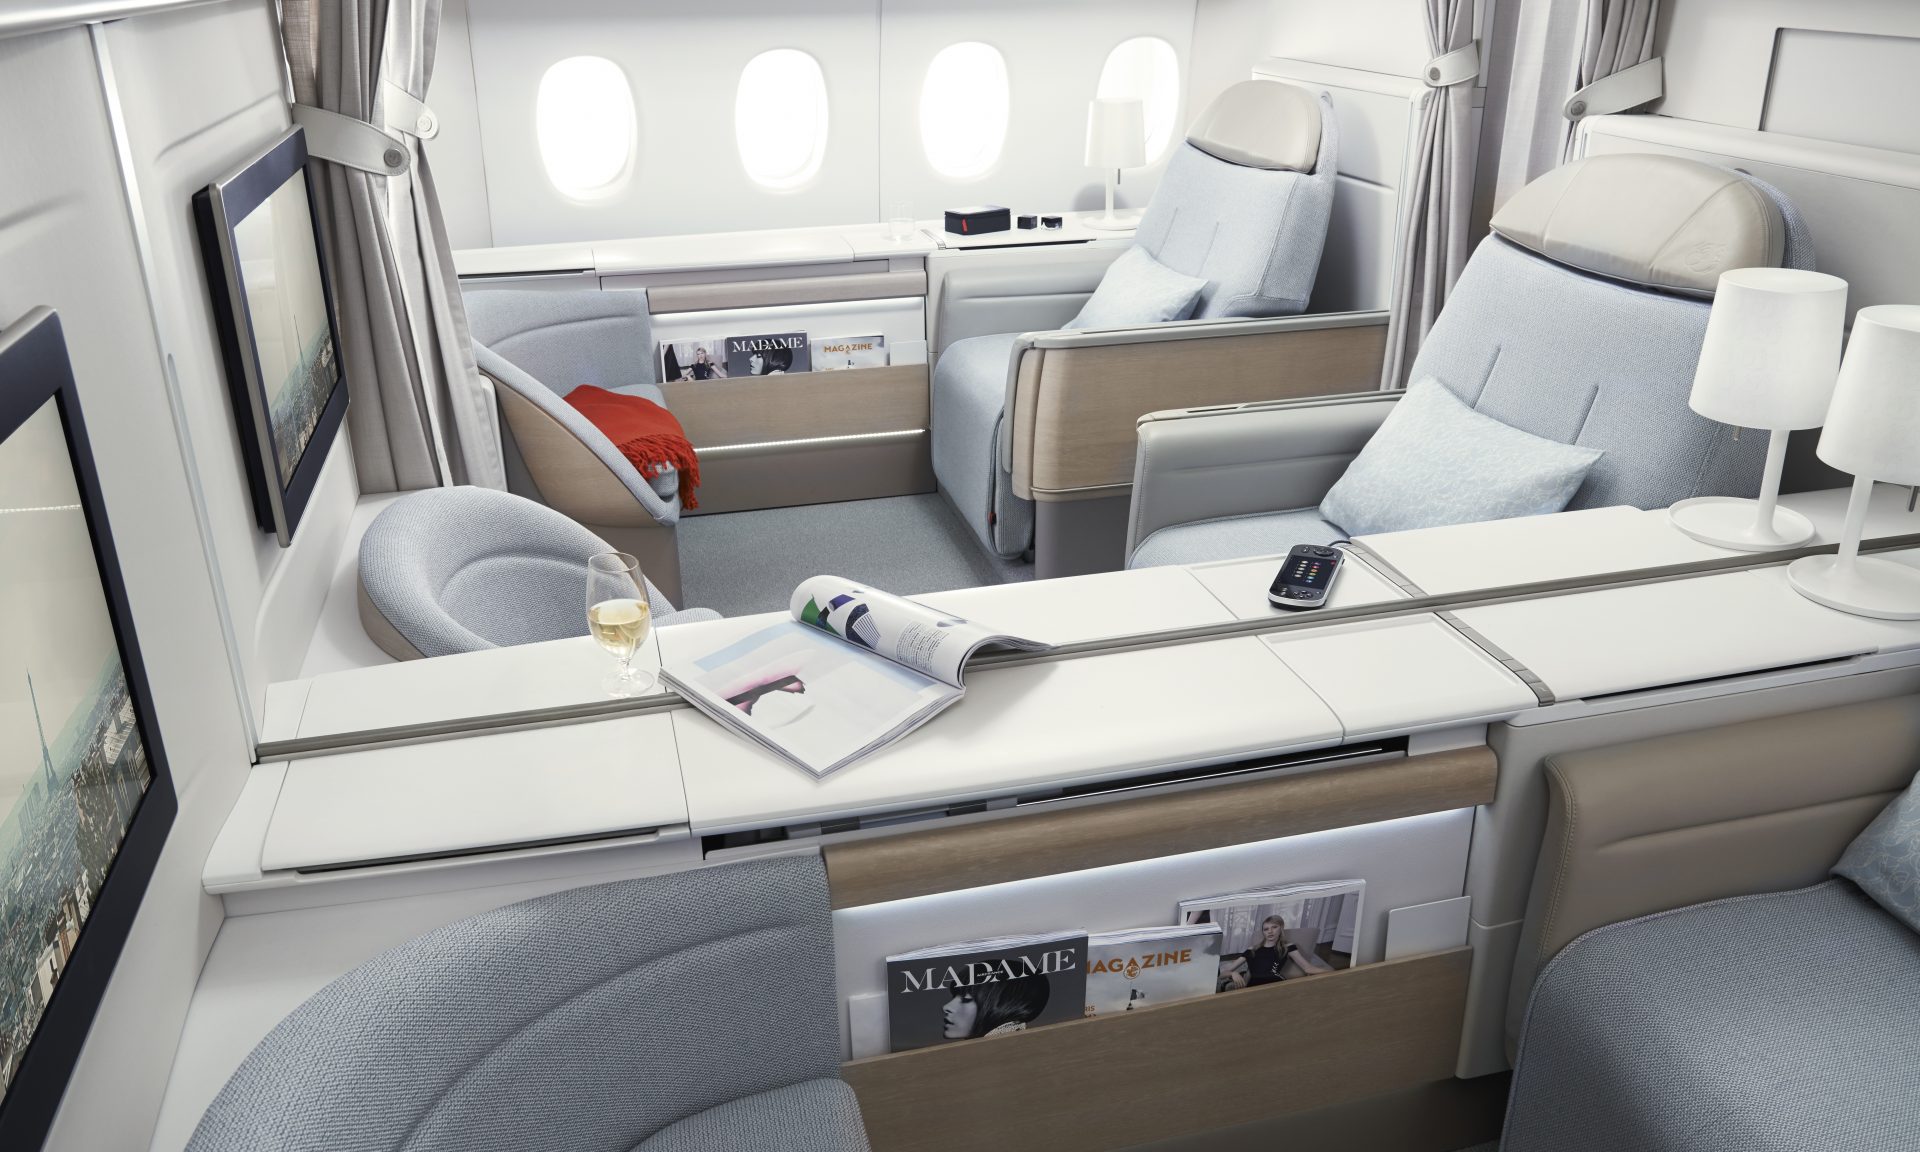 Air France first class suite luxury